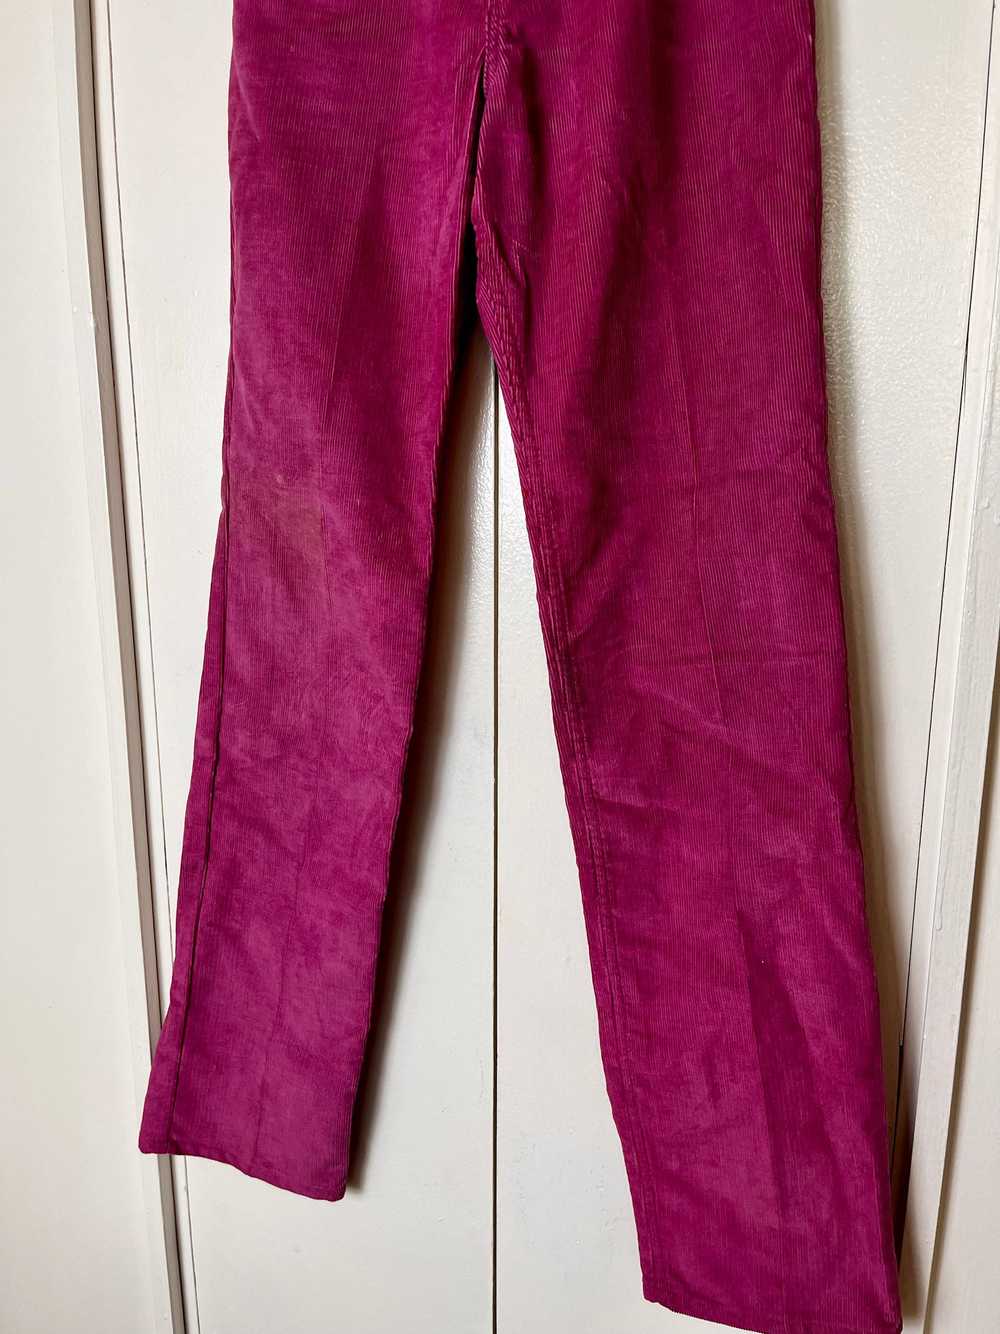 Vintage Late 1970's/Early 1980's "Wrangler" Pink … - image 7